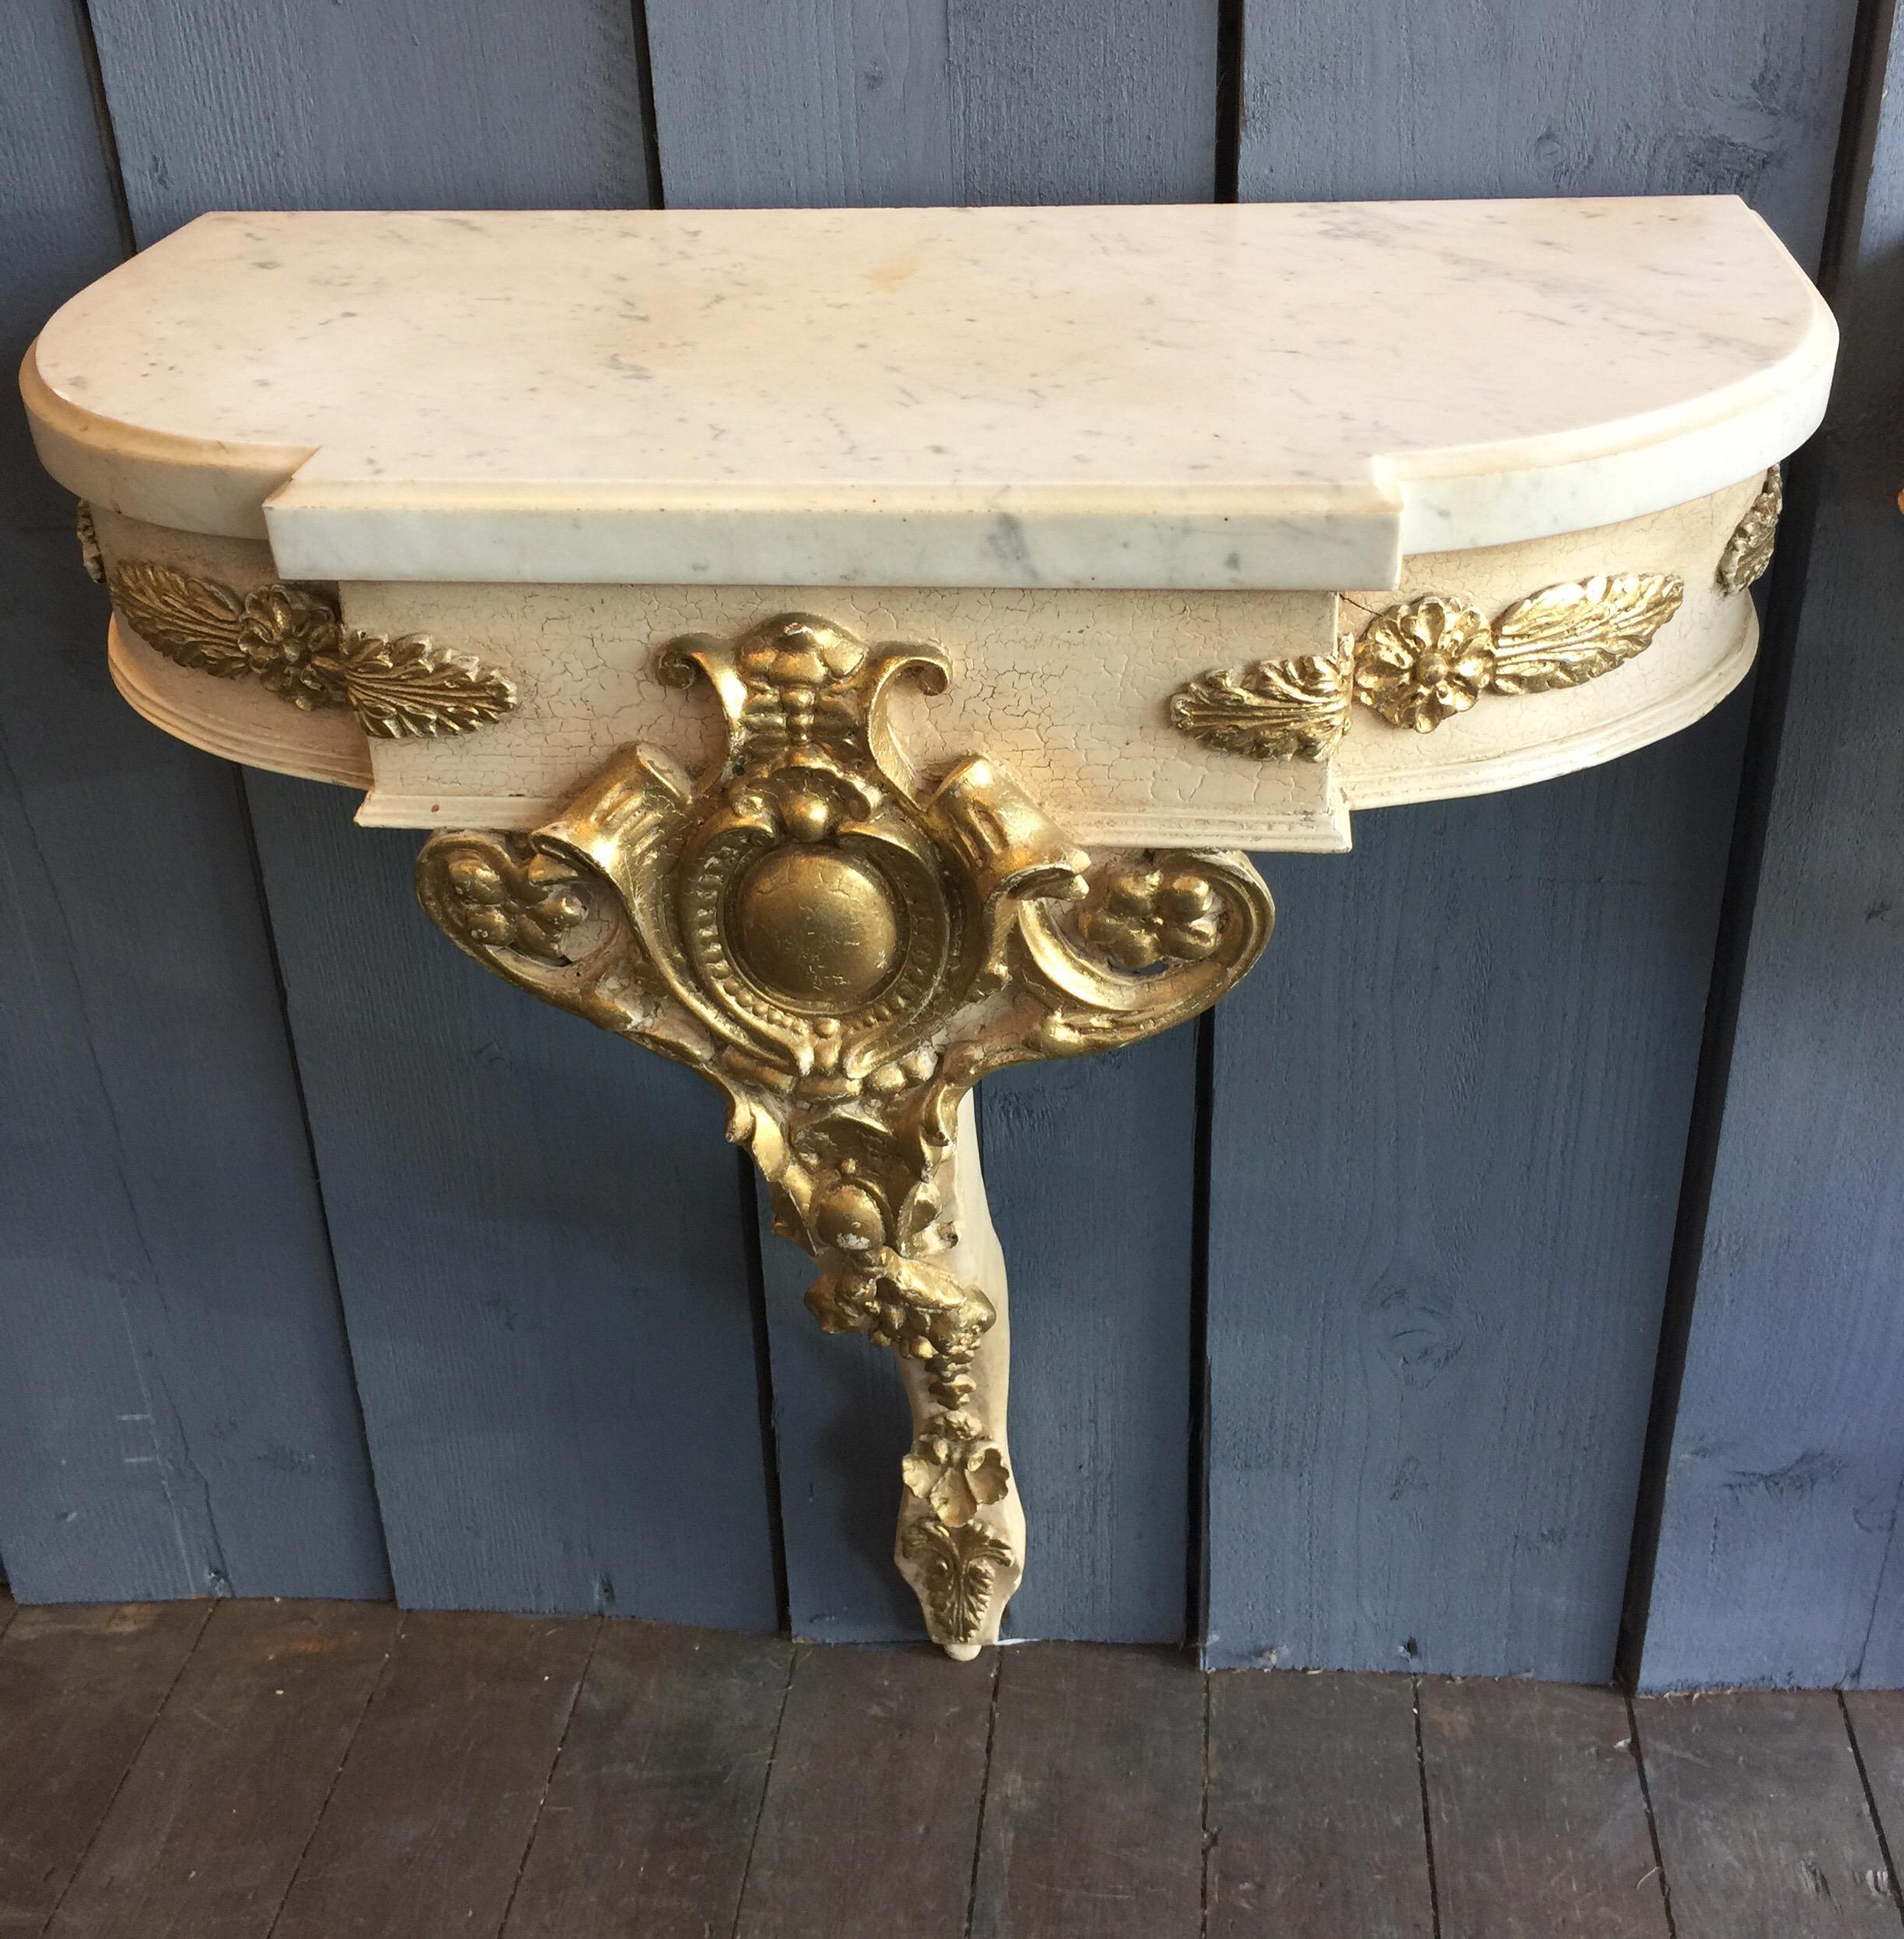 A lovely pair of painted Empire style console tables or nightstands. Cream painted with gilt decoration in a slightly distressed finish. Nicely designed with a good color. Marble is in good condition. Probably made mid to the third quarter of the